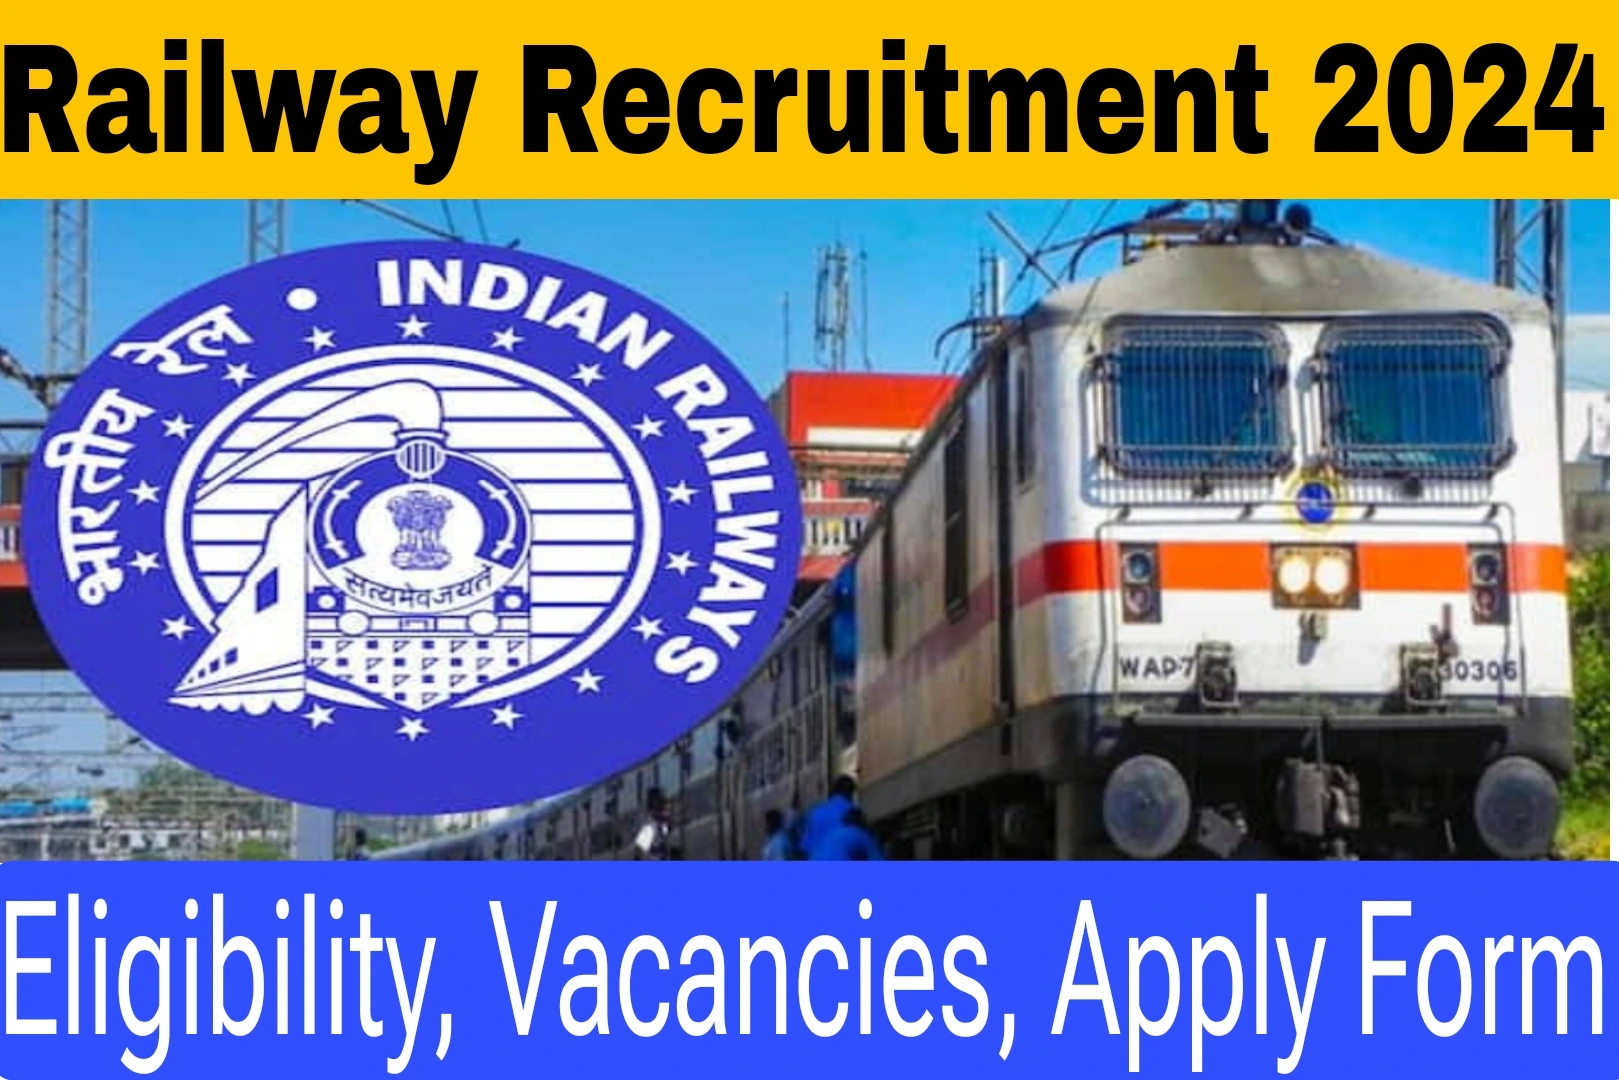 Railway Recruitment 2024, Eligibility and Apply Form for 1646 Vacancies